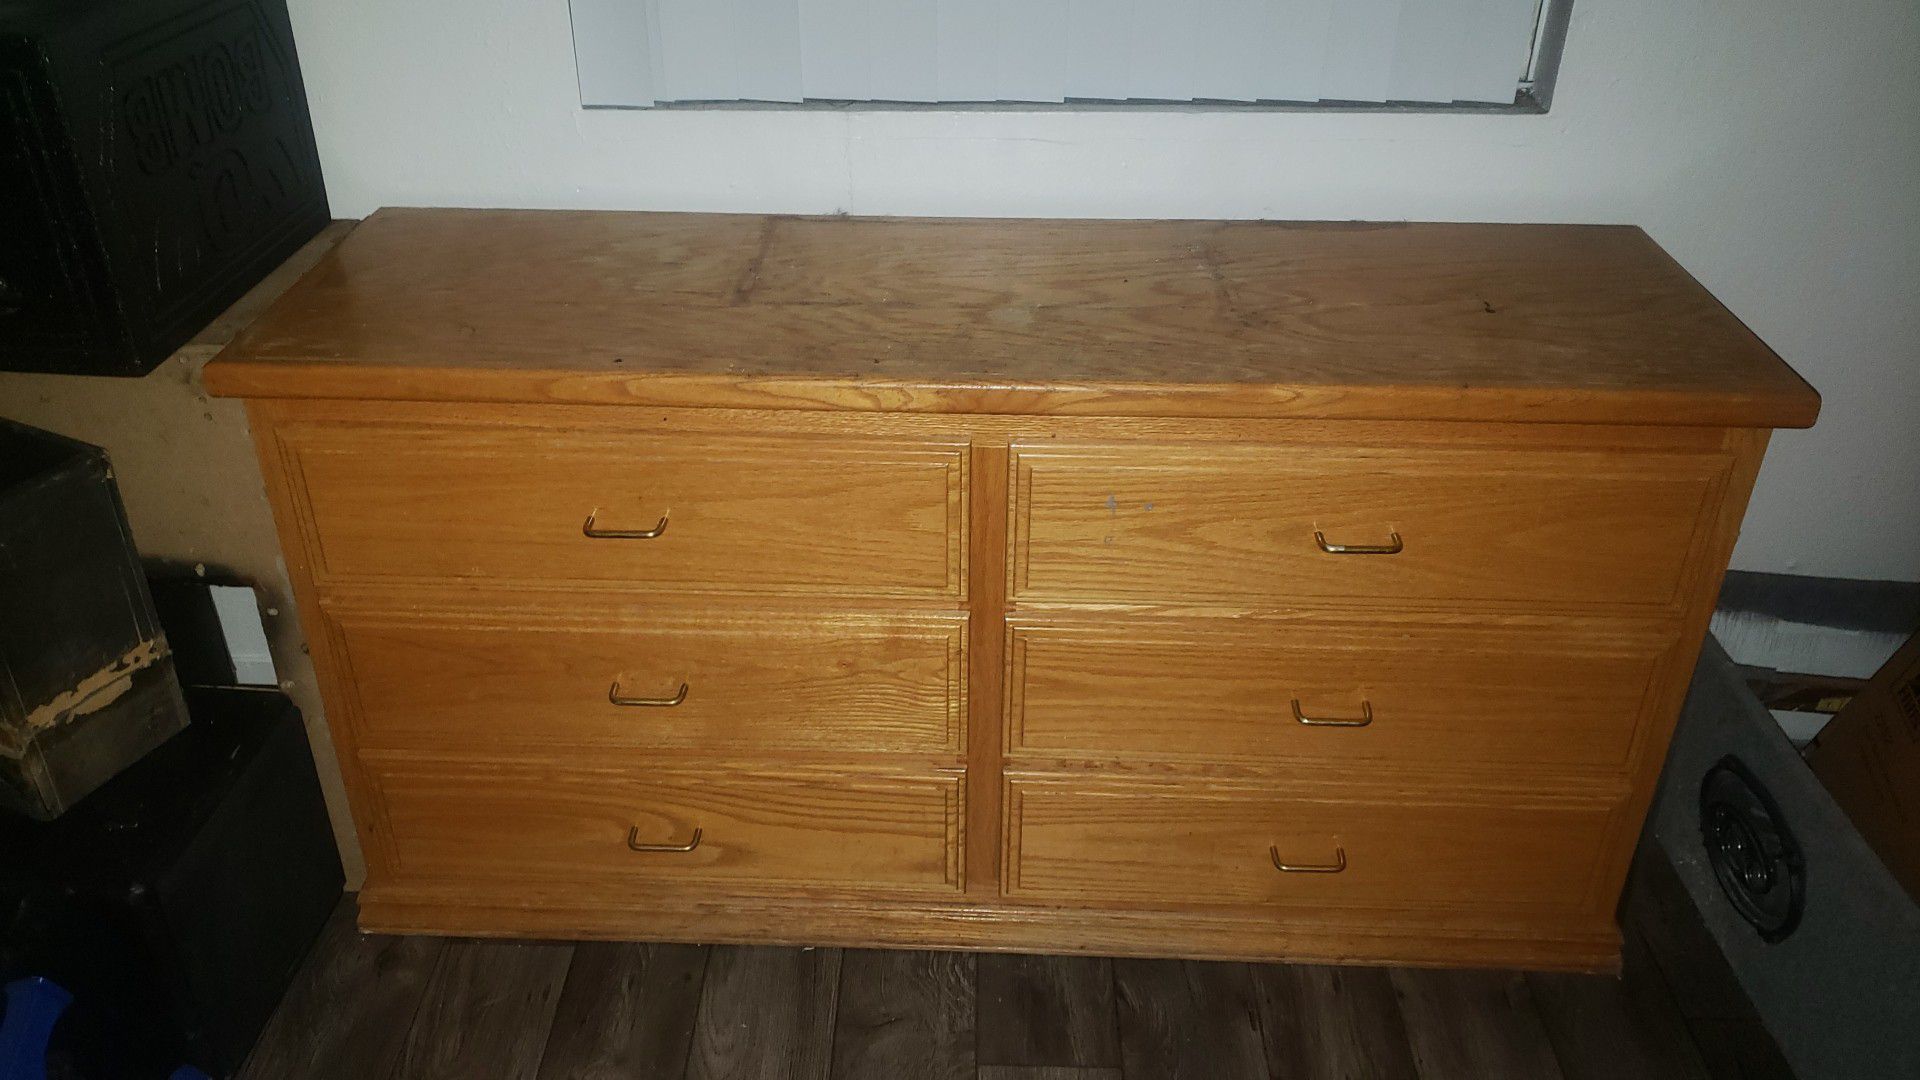 6 drawer dresser. Real wood. Nice condition. Make offer. I need to move soon